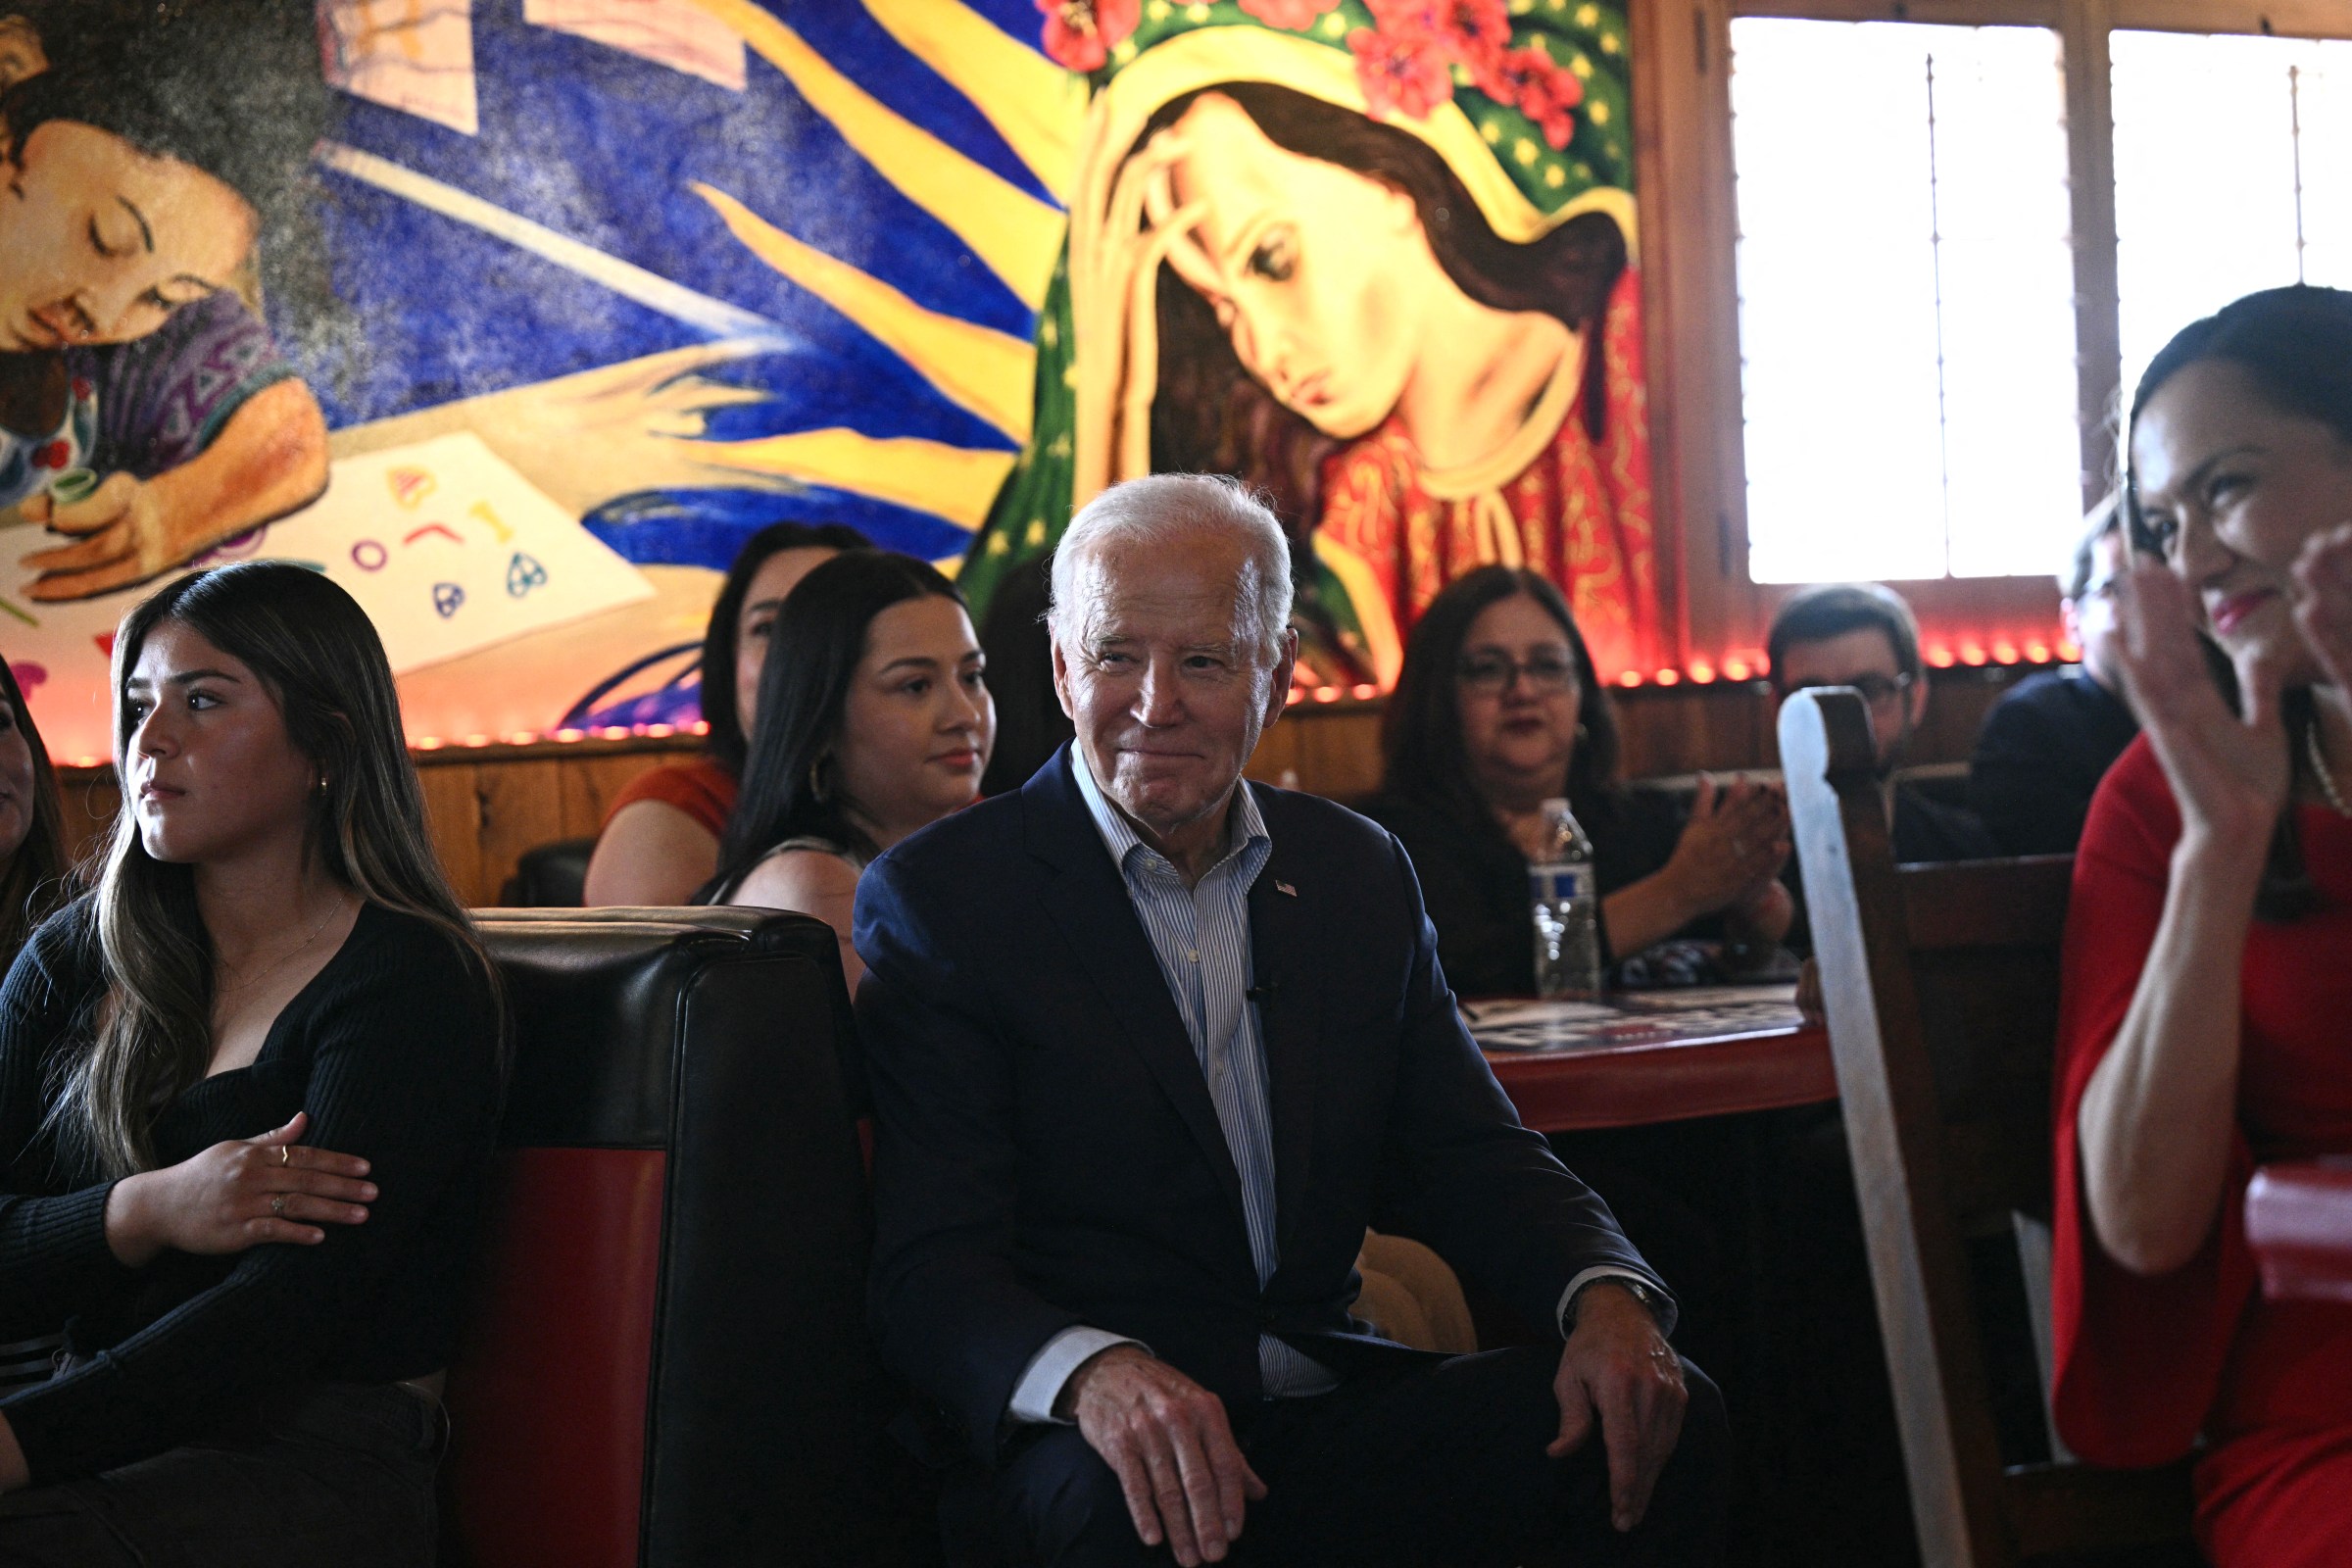 Biden is doing everything to reach Latinos. Trump is barely trying.